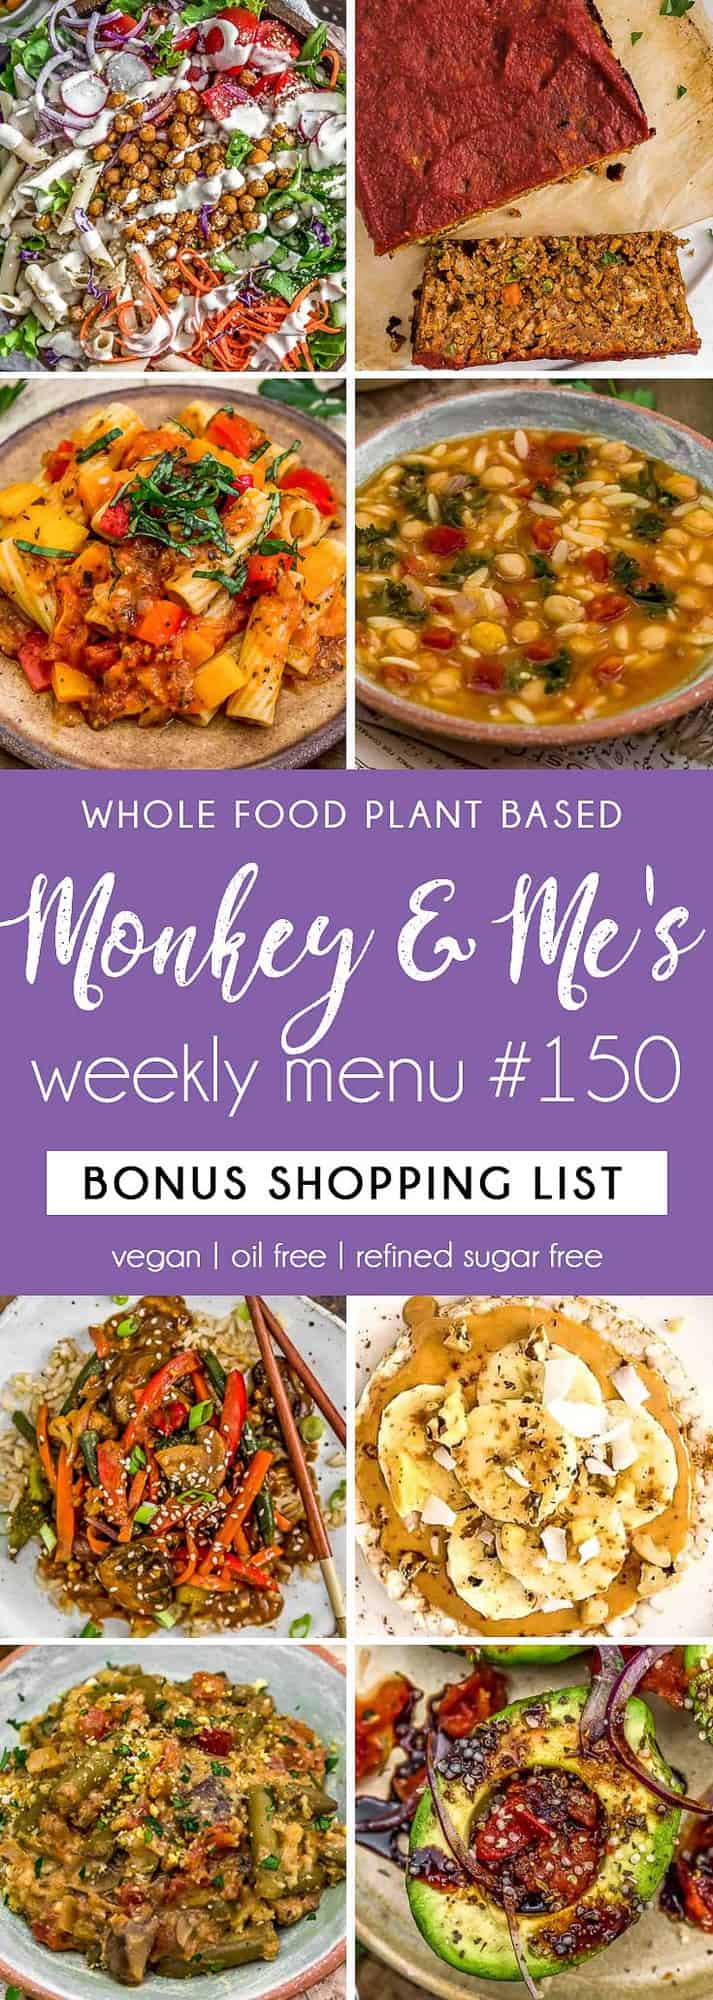 Monkey and Me's Menu 150 featuring 8 recipes